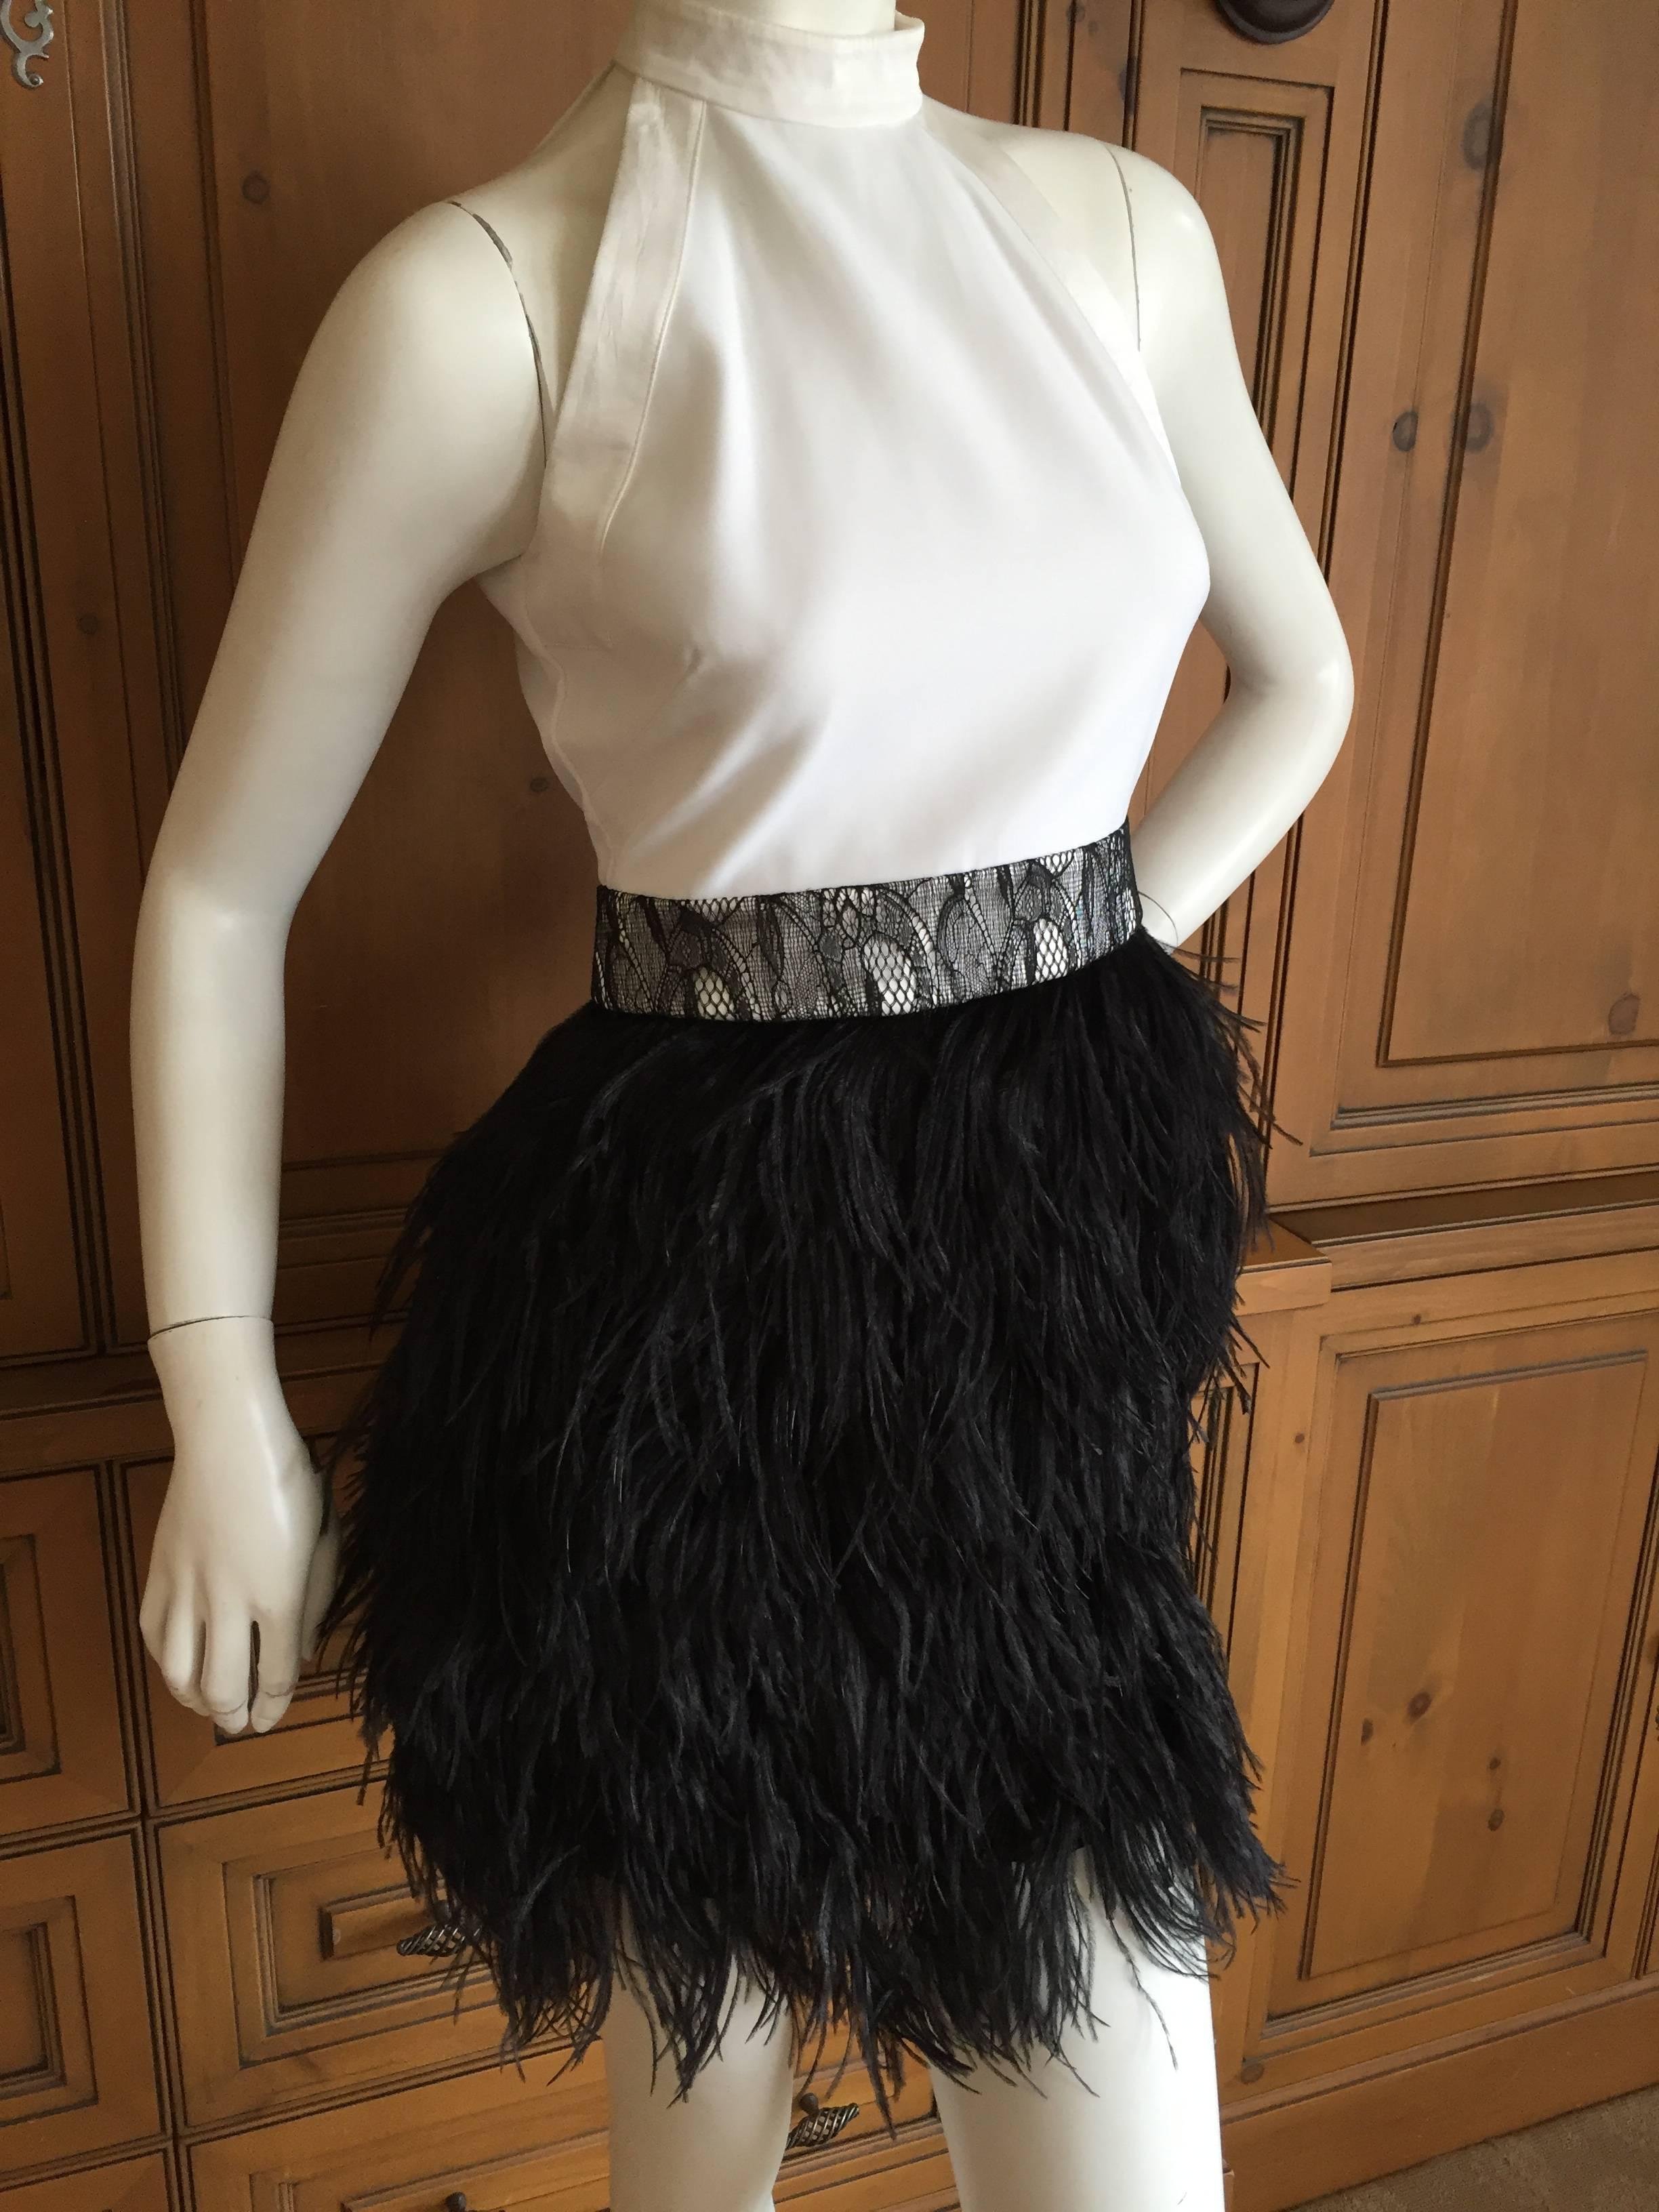 Delightful cocktail dress with feather skirt from Givenchy by Riccardo Tisci 2011.
Size 38 
Bust 35